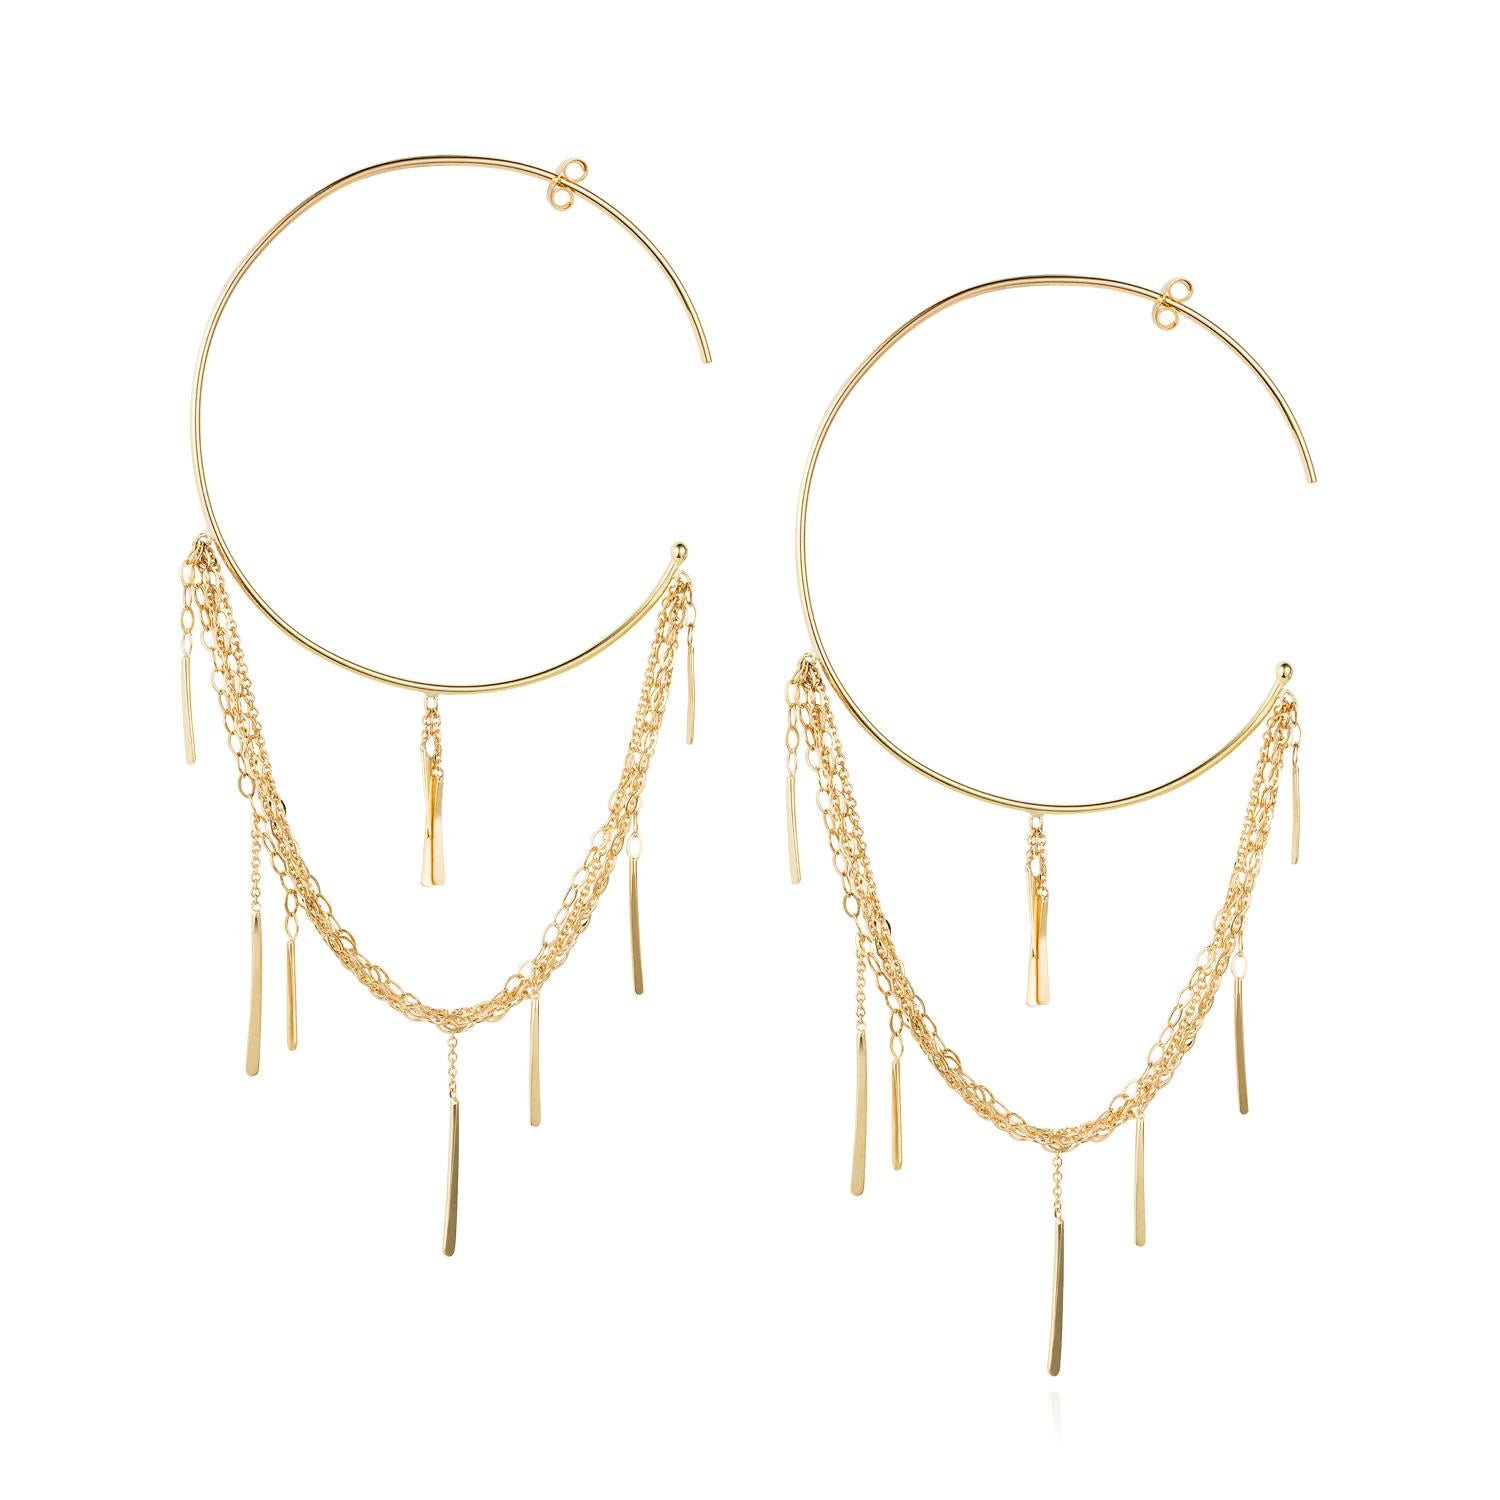 Sweet Pea Sycamore 18k Yellow Gold Large Hoop Earrings With Layered Chains For Sale